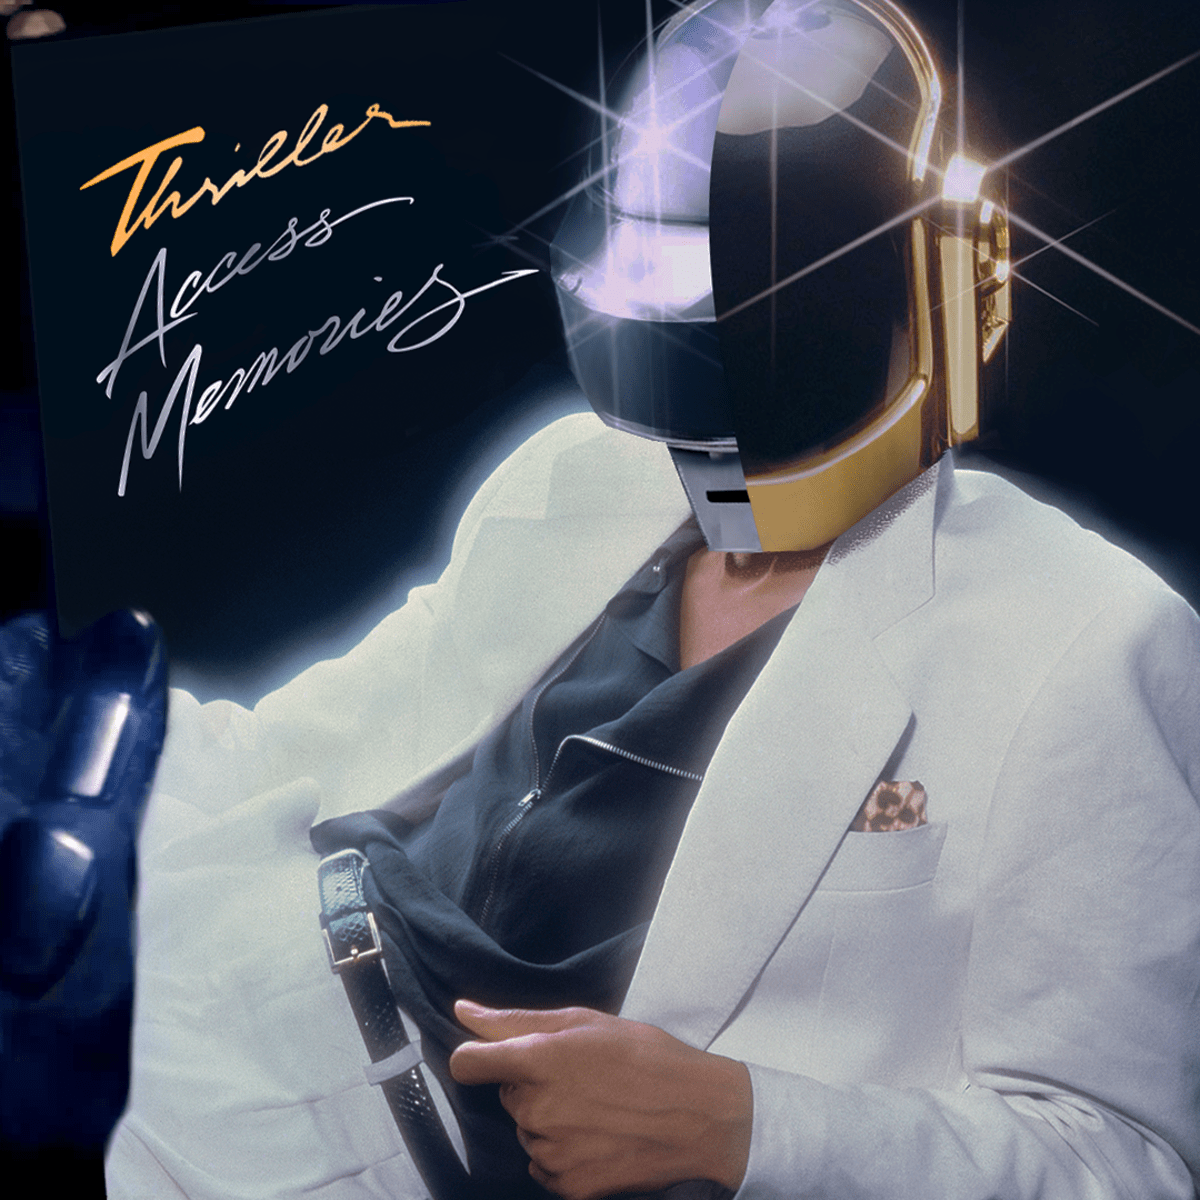 Someone Released a Full Album of Daft Punk and Michael Jackson Mashups - EDM.com - The Latest Electronic Dance Music News, Reviews &amp; Artists